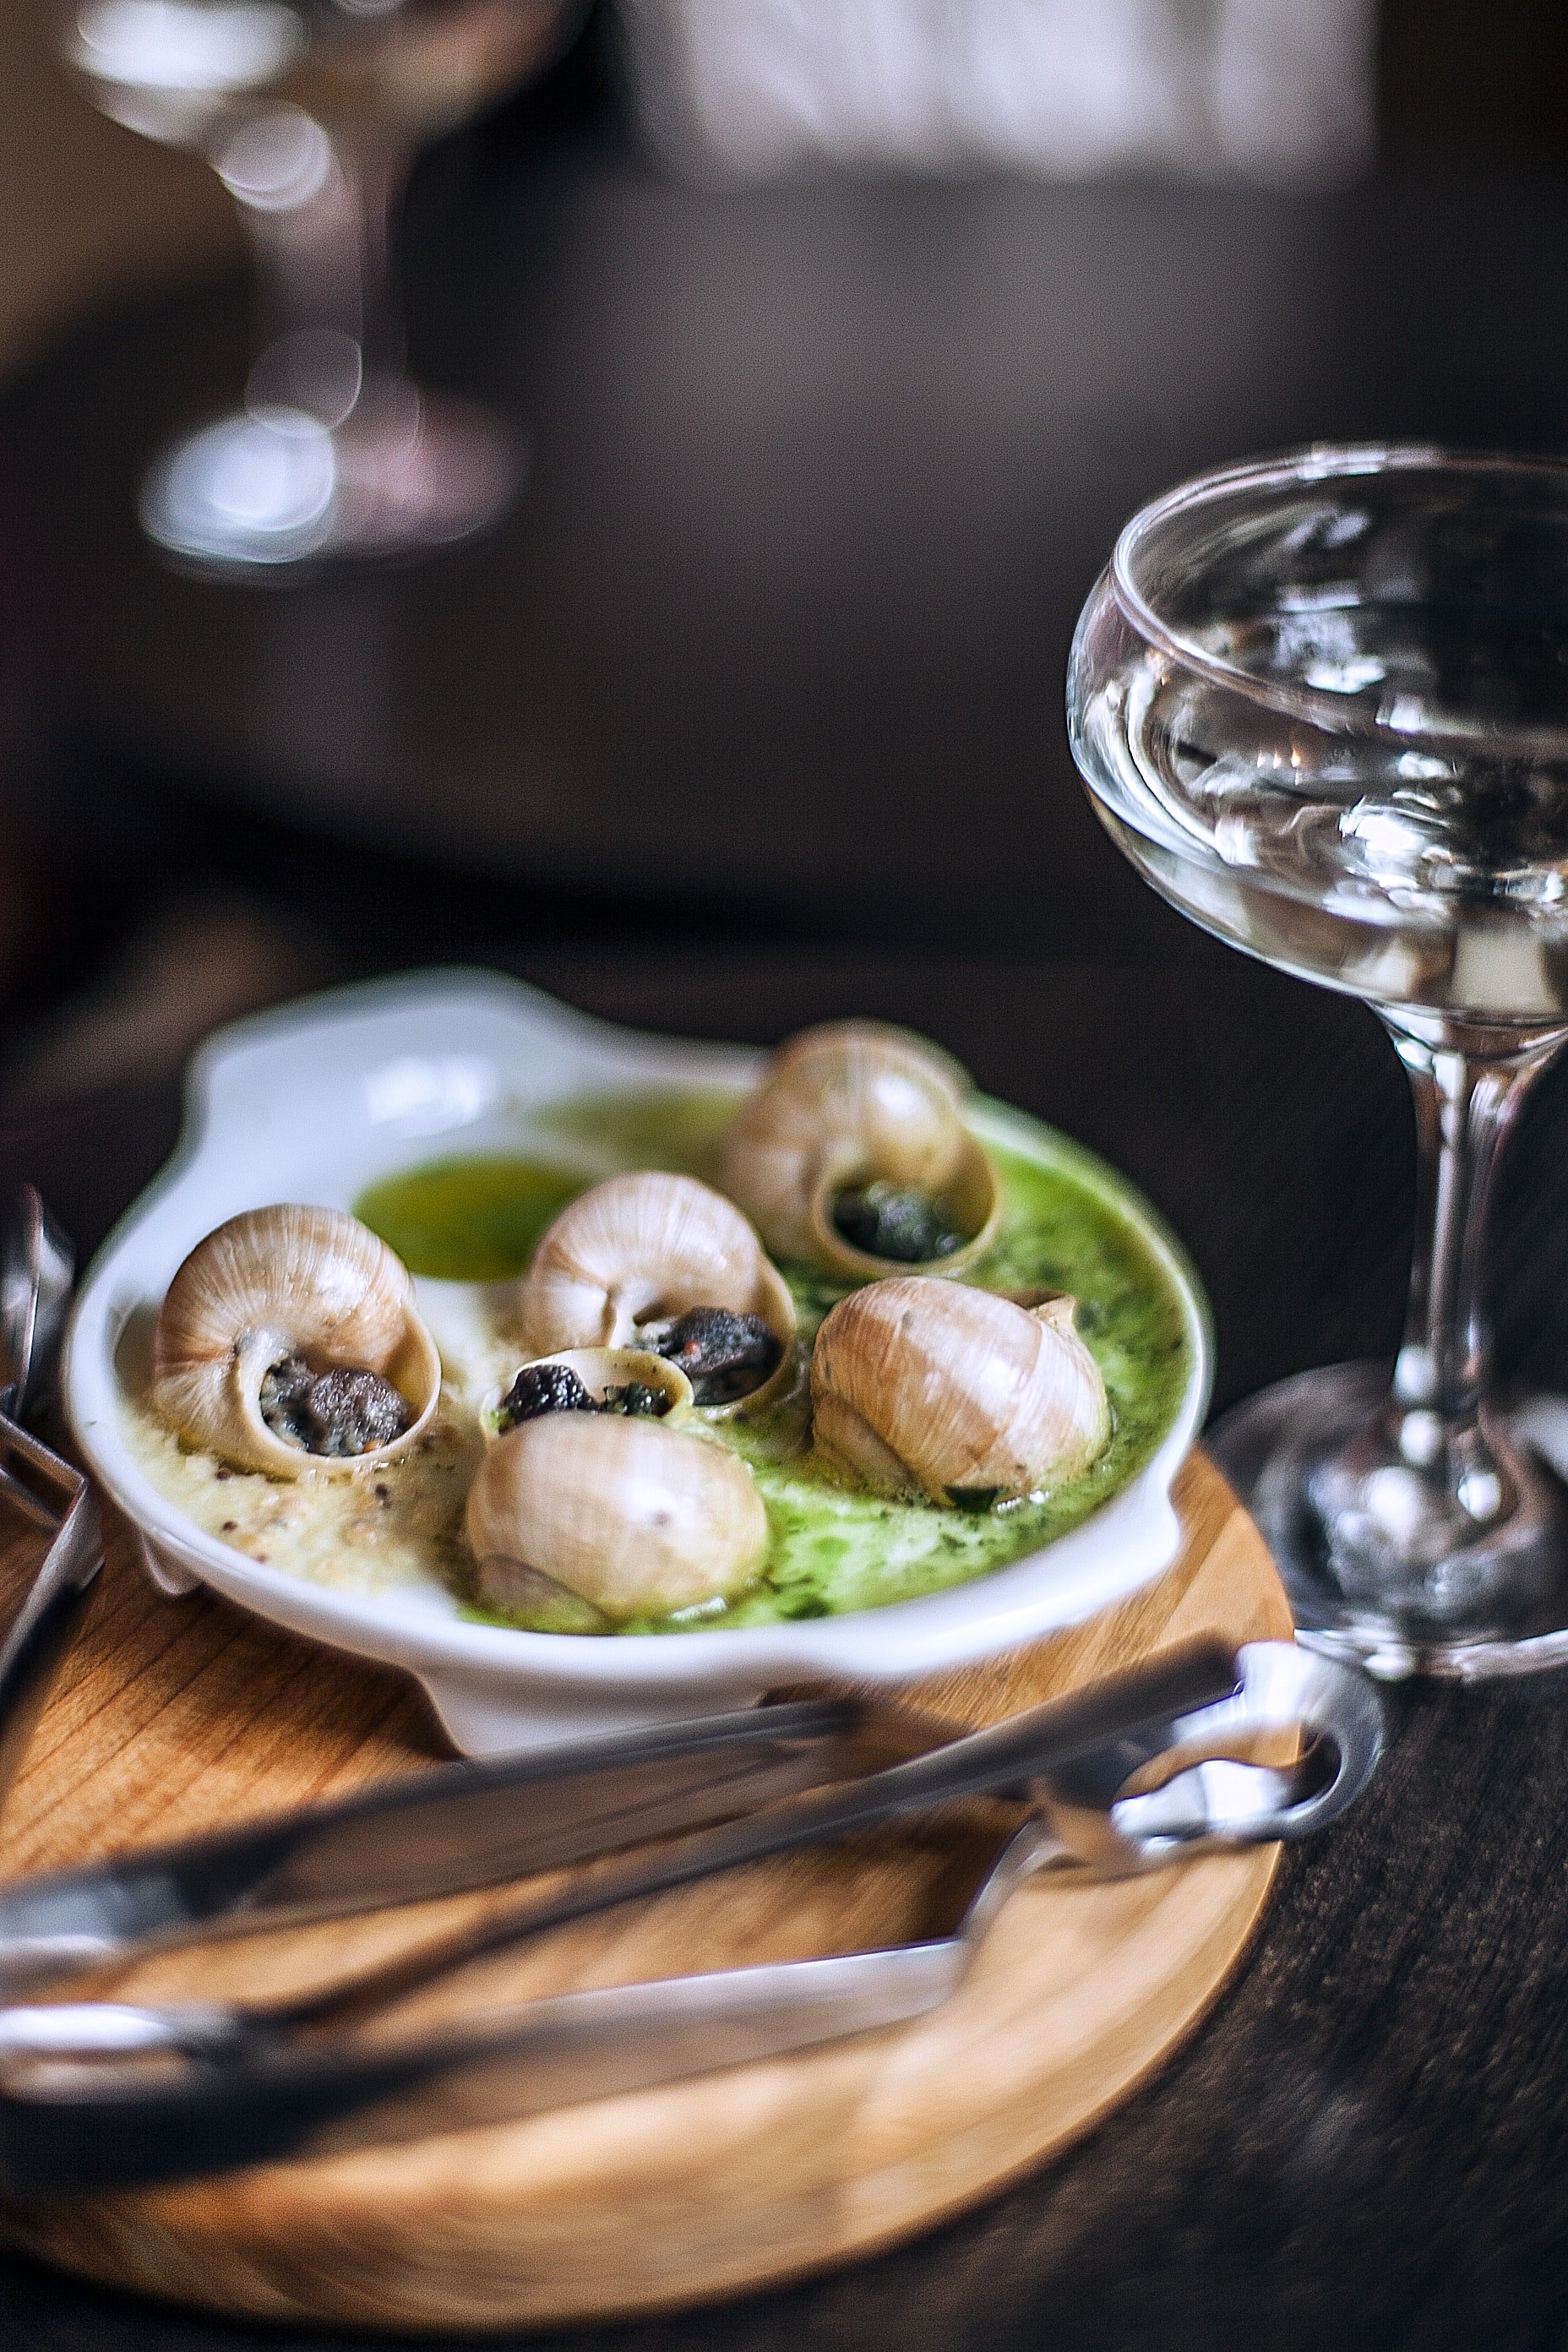 The first course they had at the French restaurant | Source: Pexels